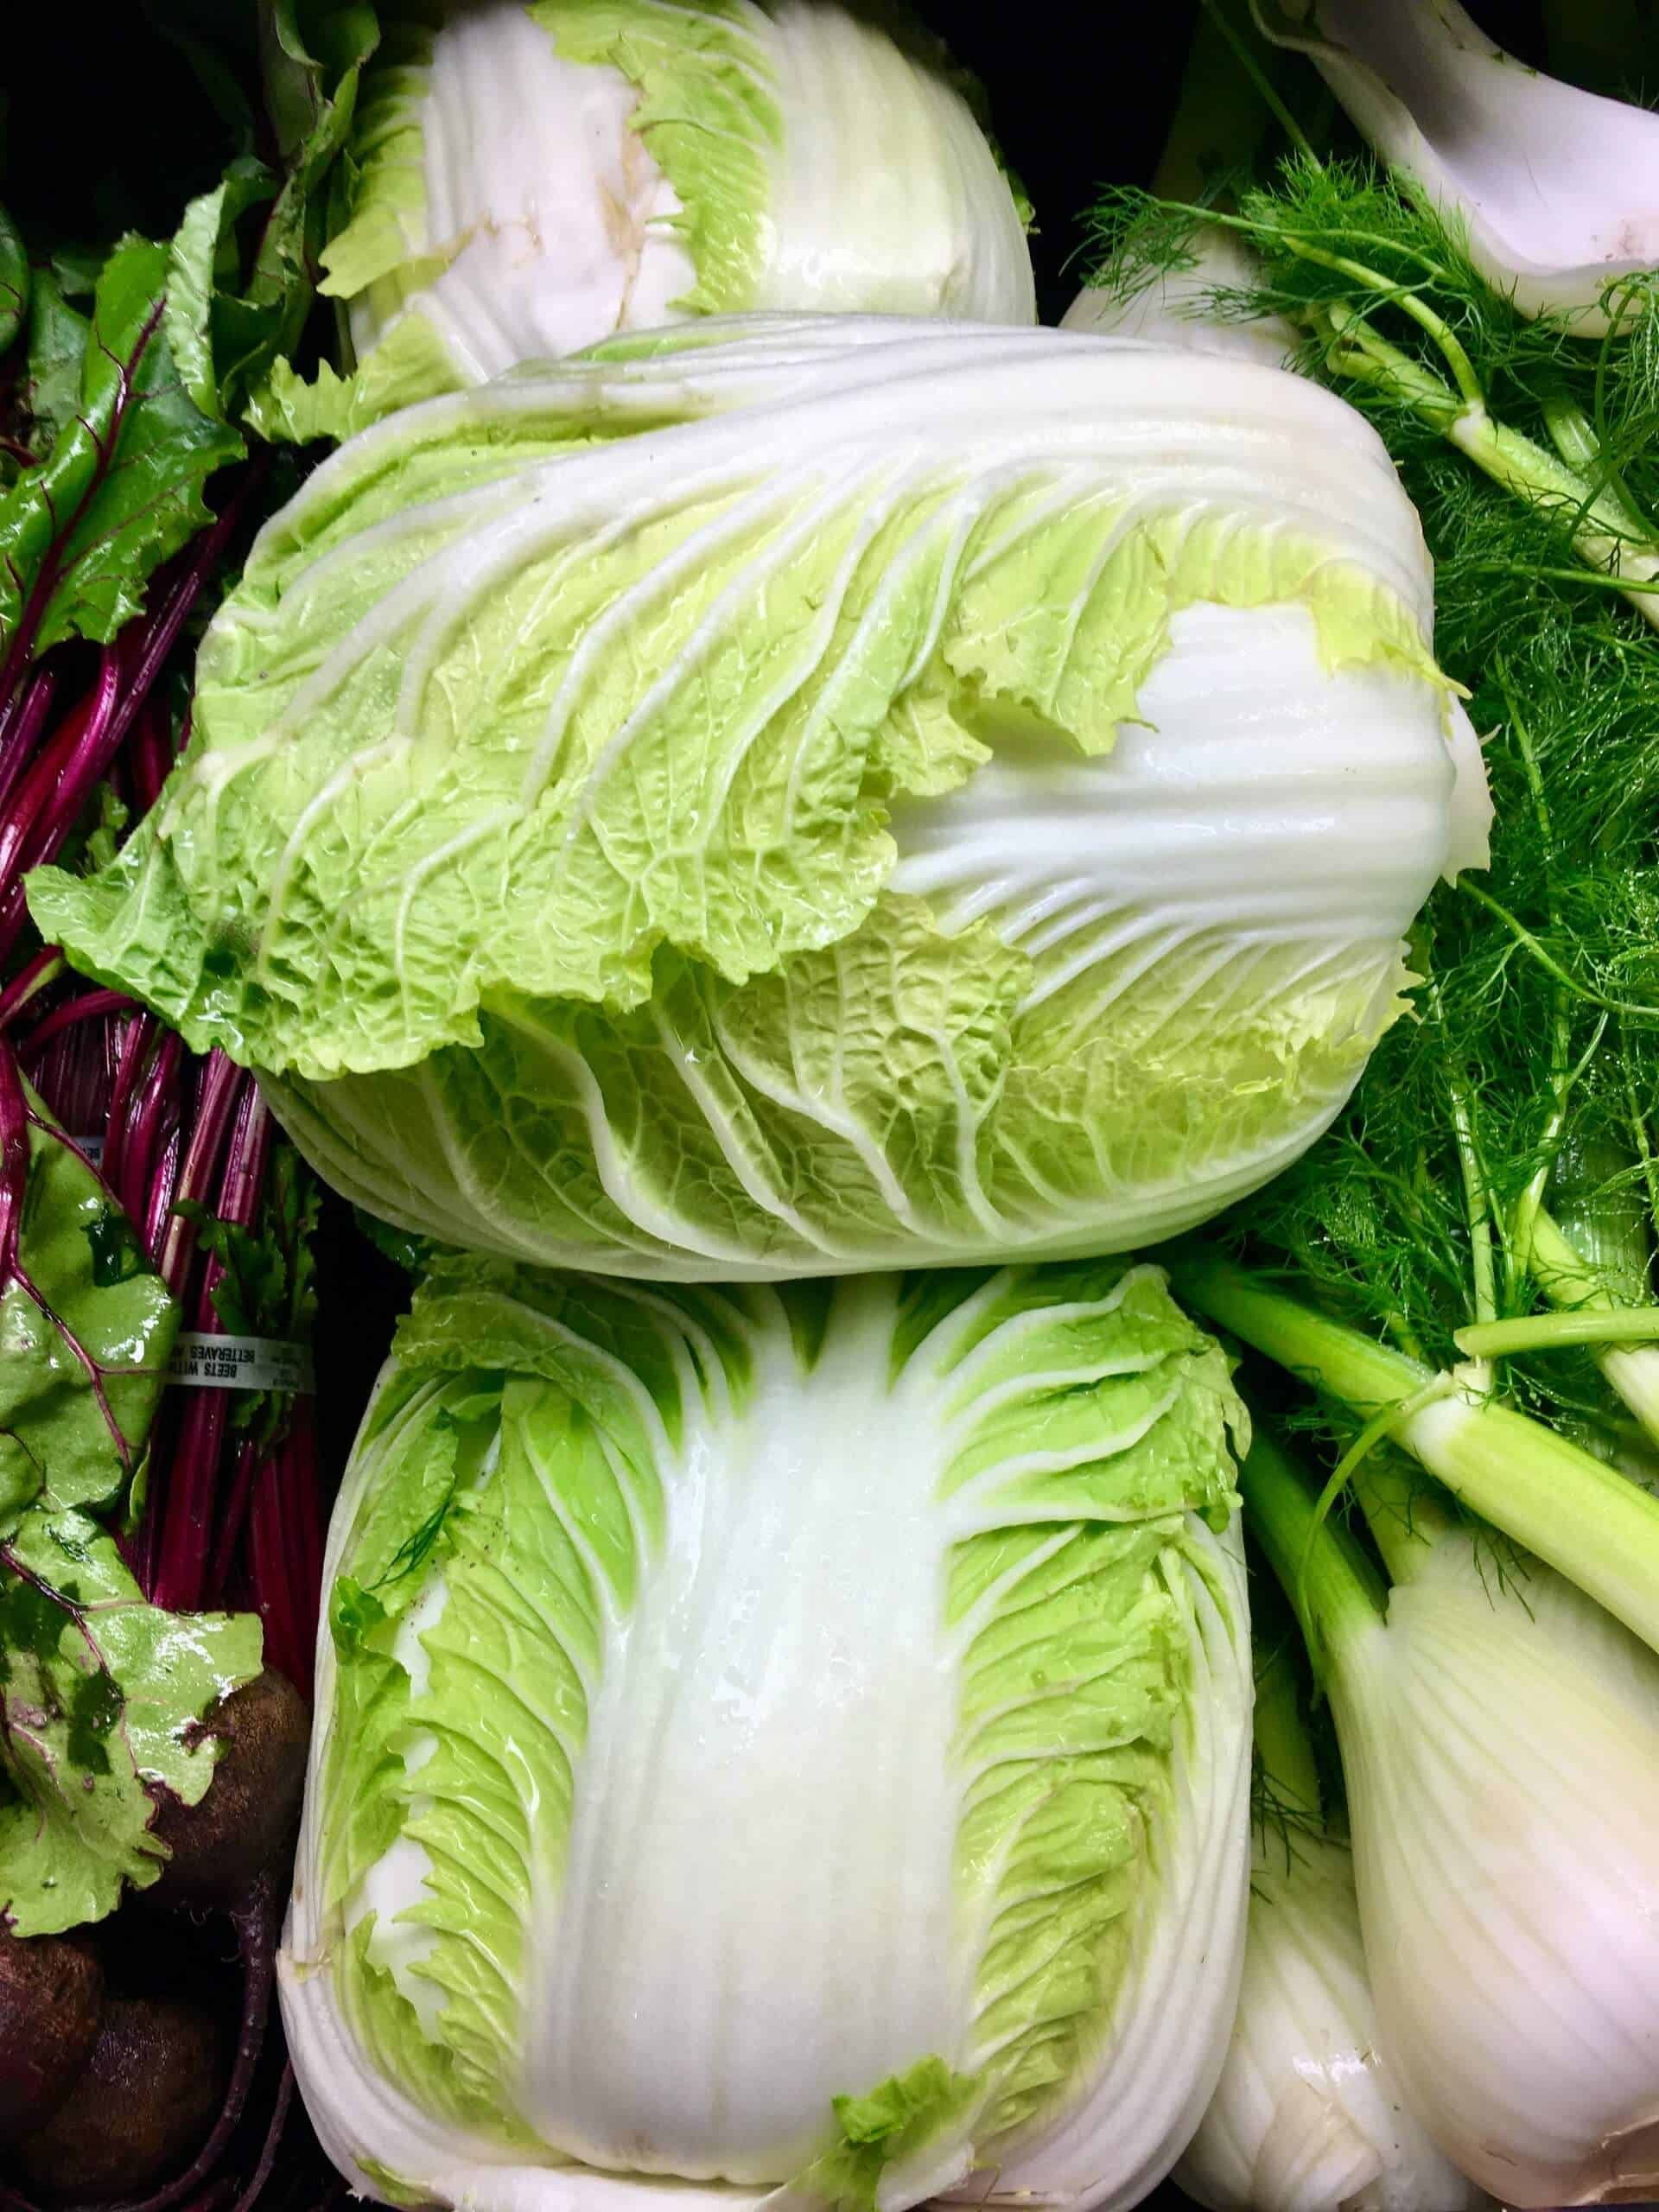 Cabbage – why should you eat it? Find out all the properties of this vegetable